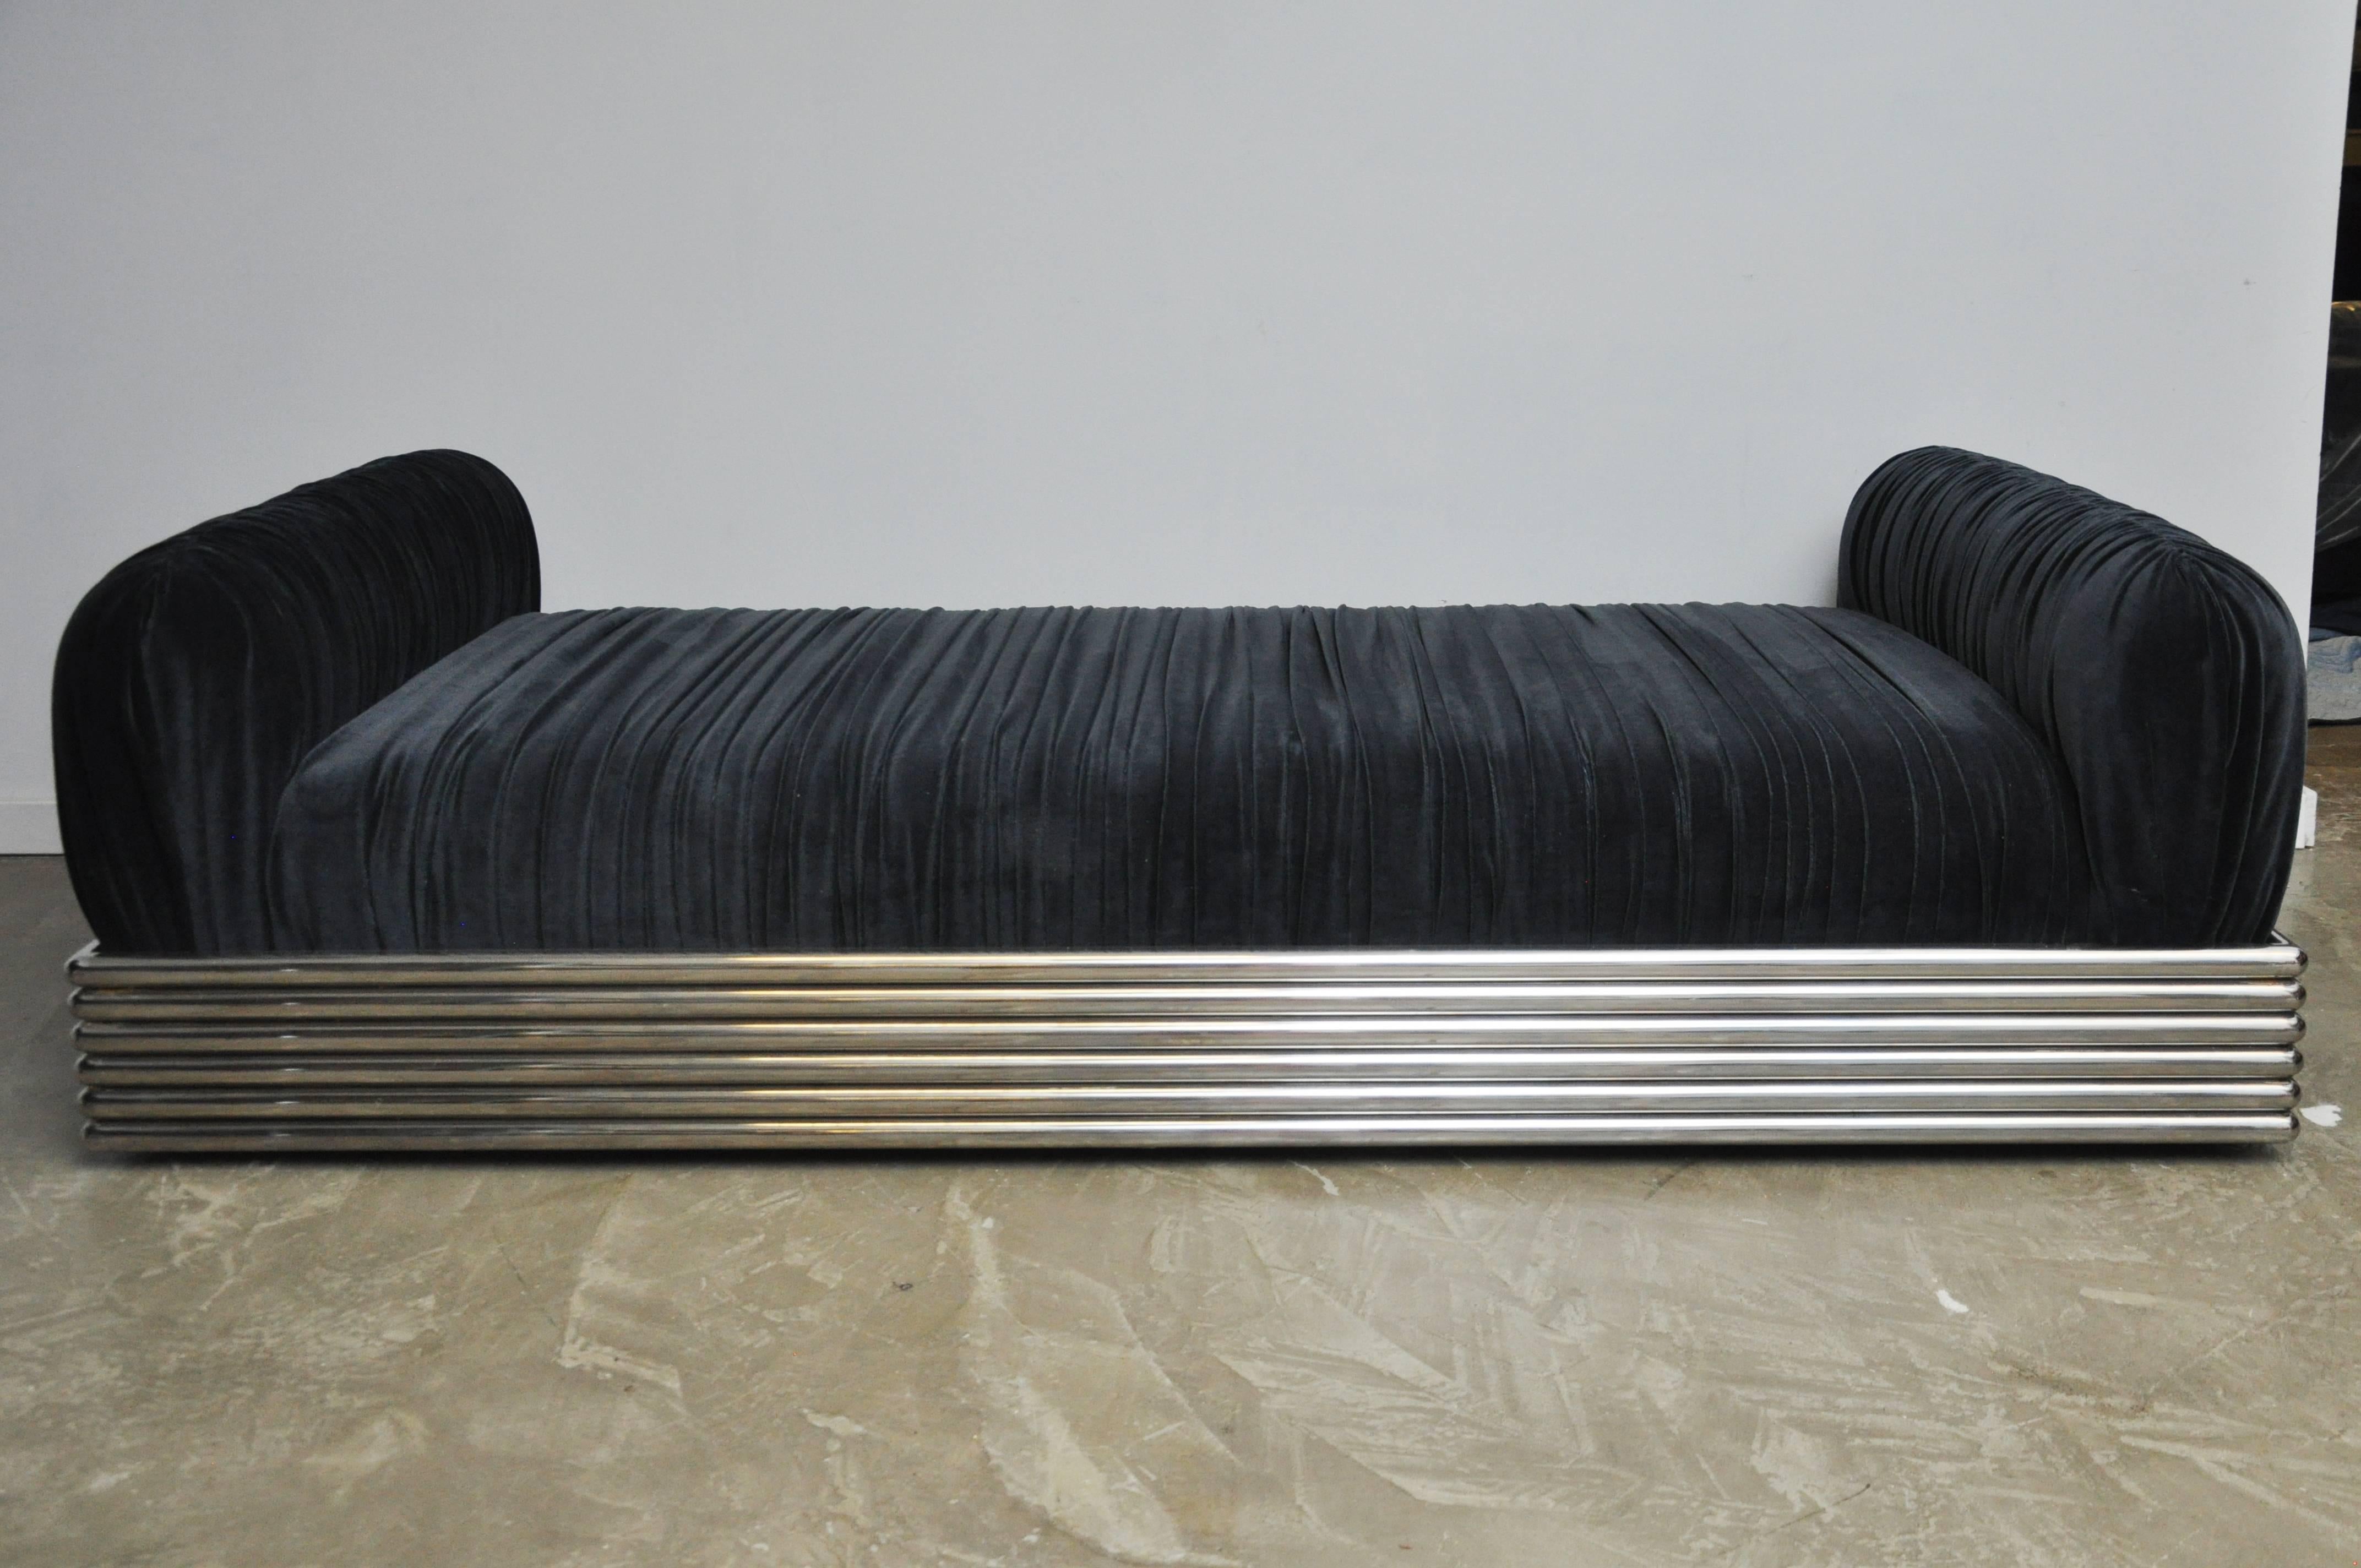 This iconic daybed called RADIATOR was designed by Stanley Jay Friedman approx., in the late 70's - early 80's . The RADIATOR bed was produced in regular bed sizes, but this daybed shown is a special custom beautifully executed size. Fully restored